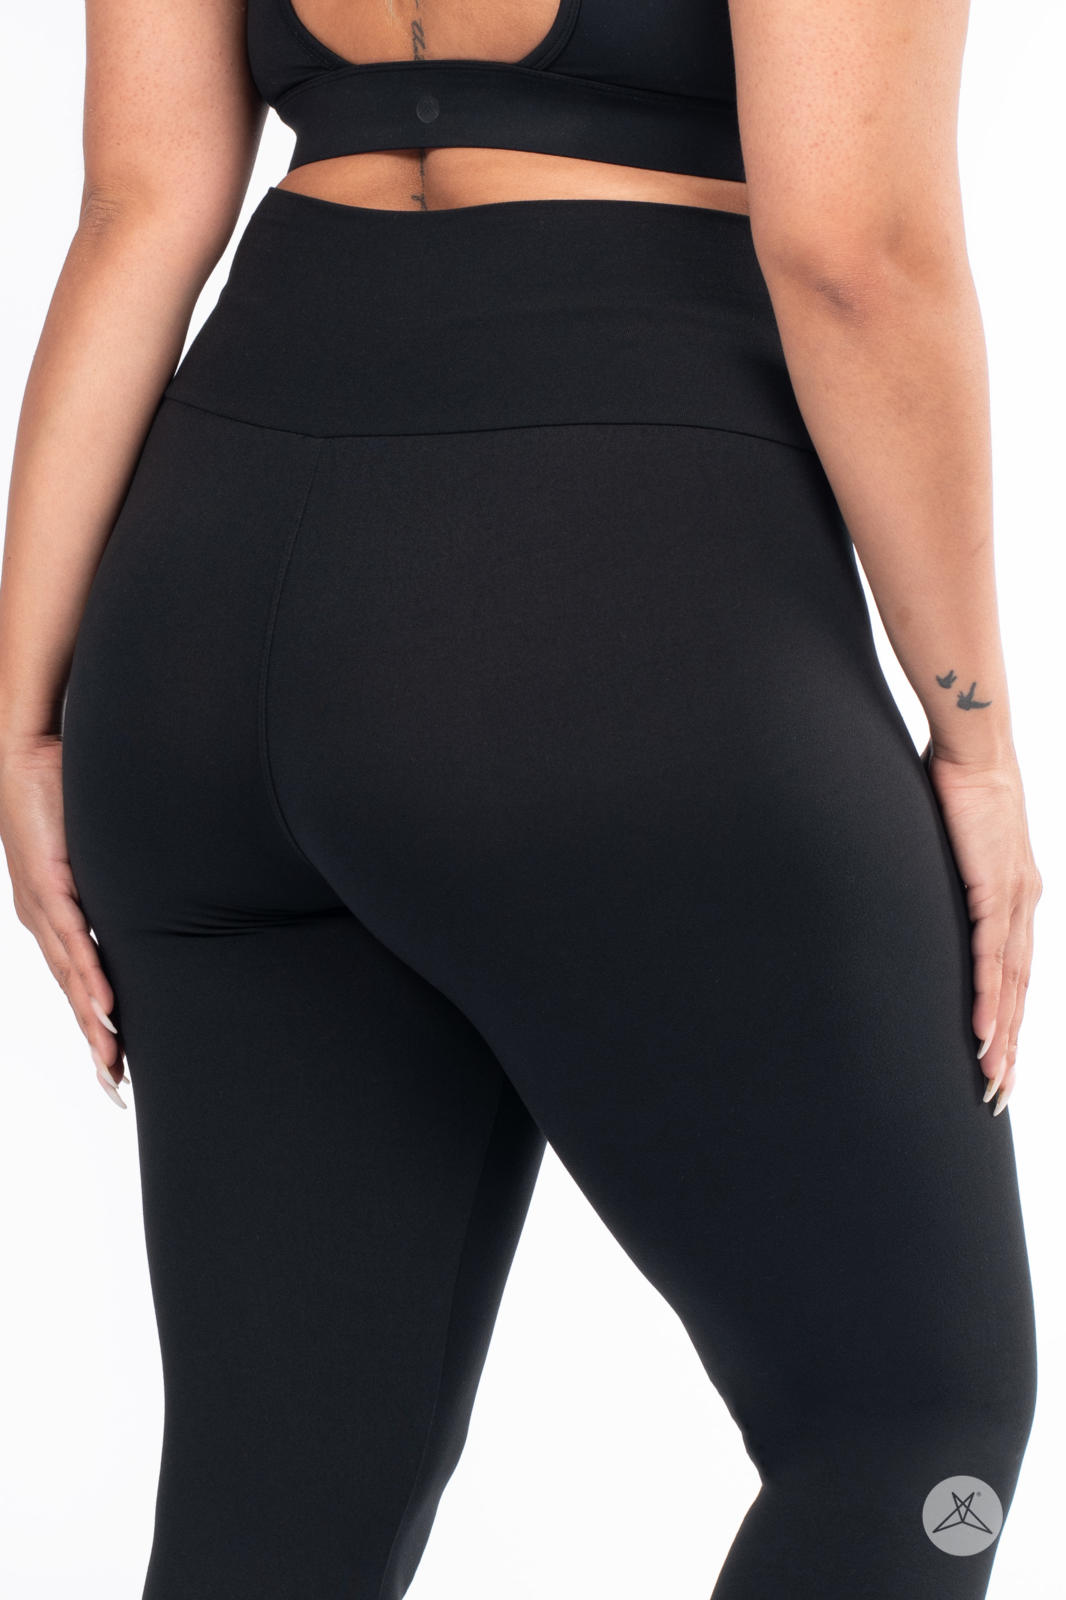 Sweet Hearts Flare Yoga Pants for Women- High Waisted Bootcut